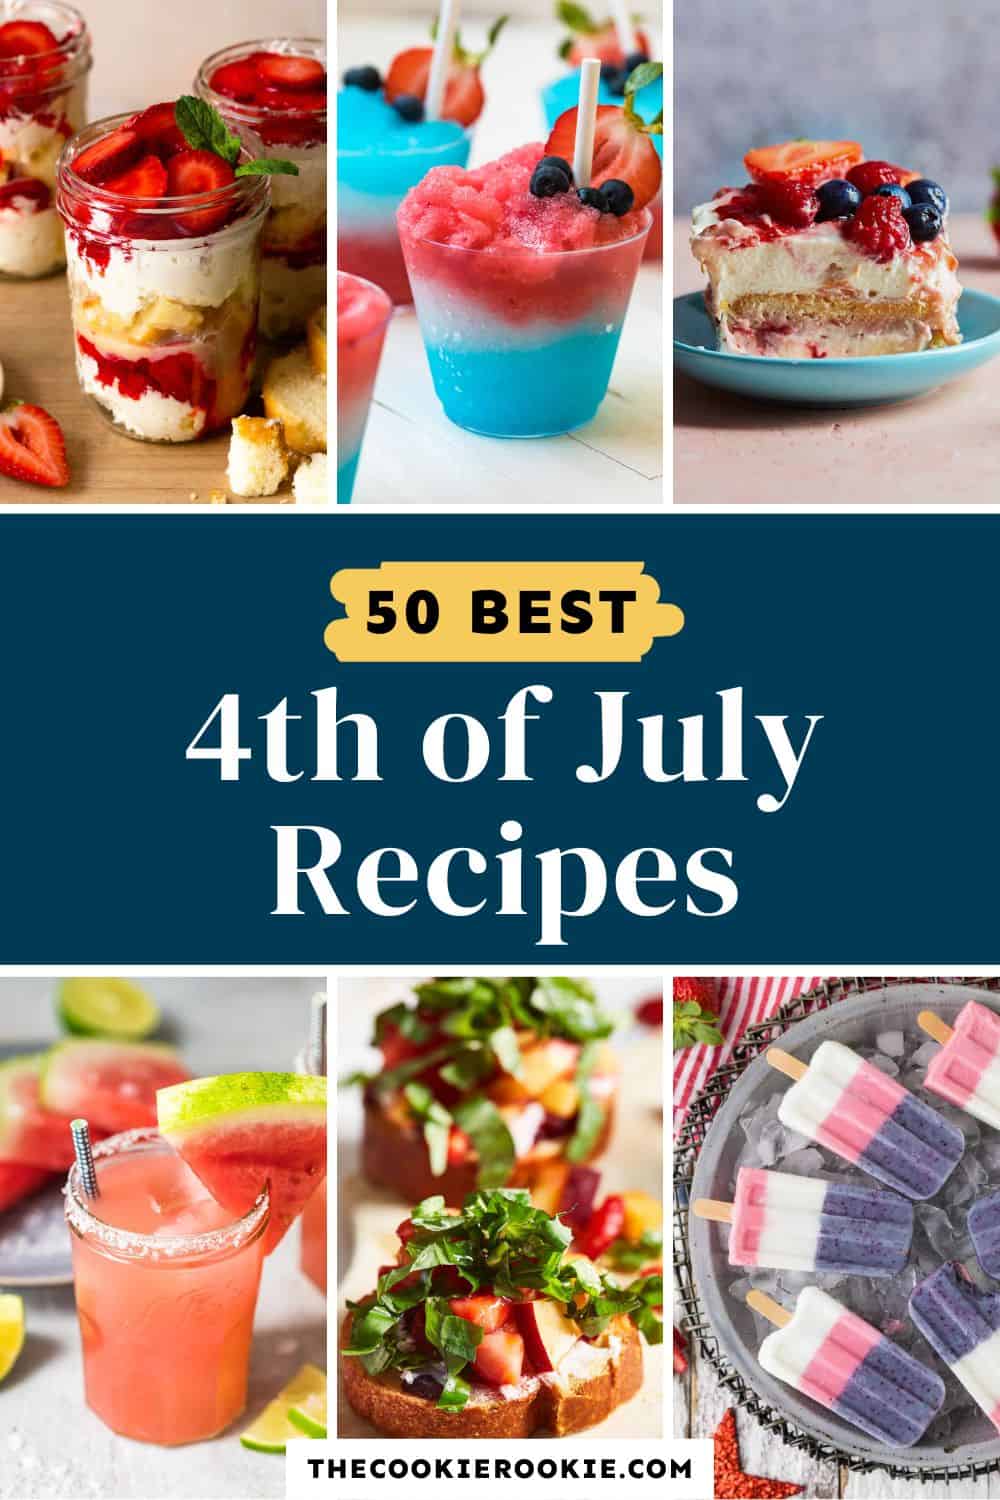 4th of July Recipes - Recipe expert